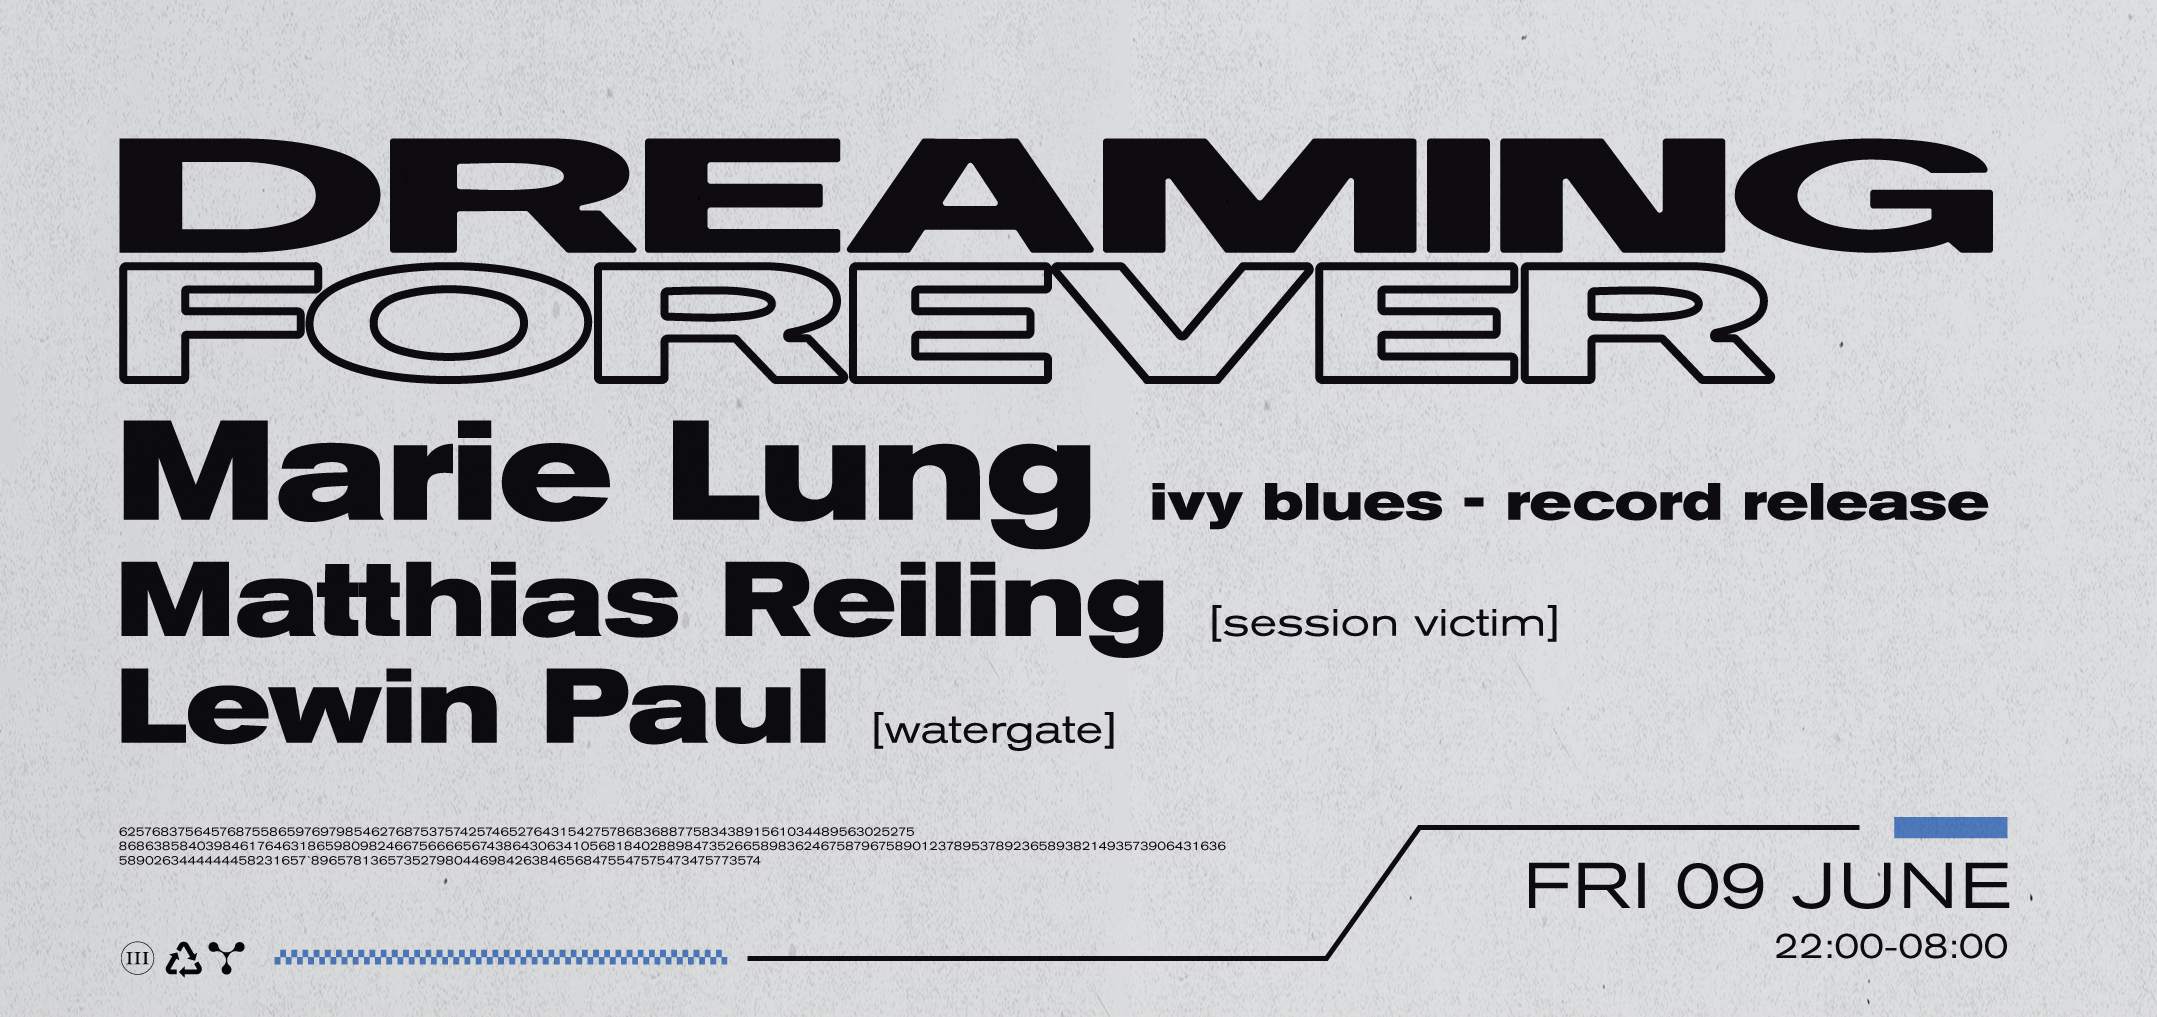 Marie Lung - Record Release party - Ivy Blues - Dreaming forever - Página frontal